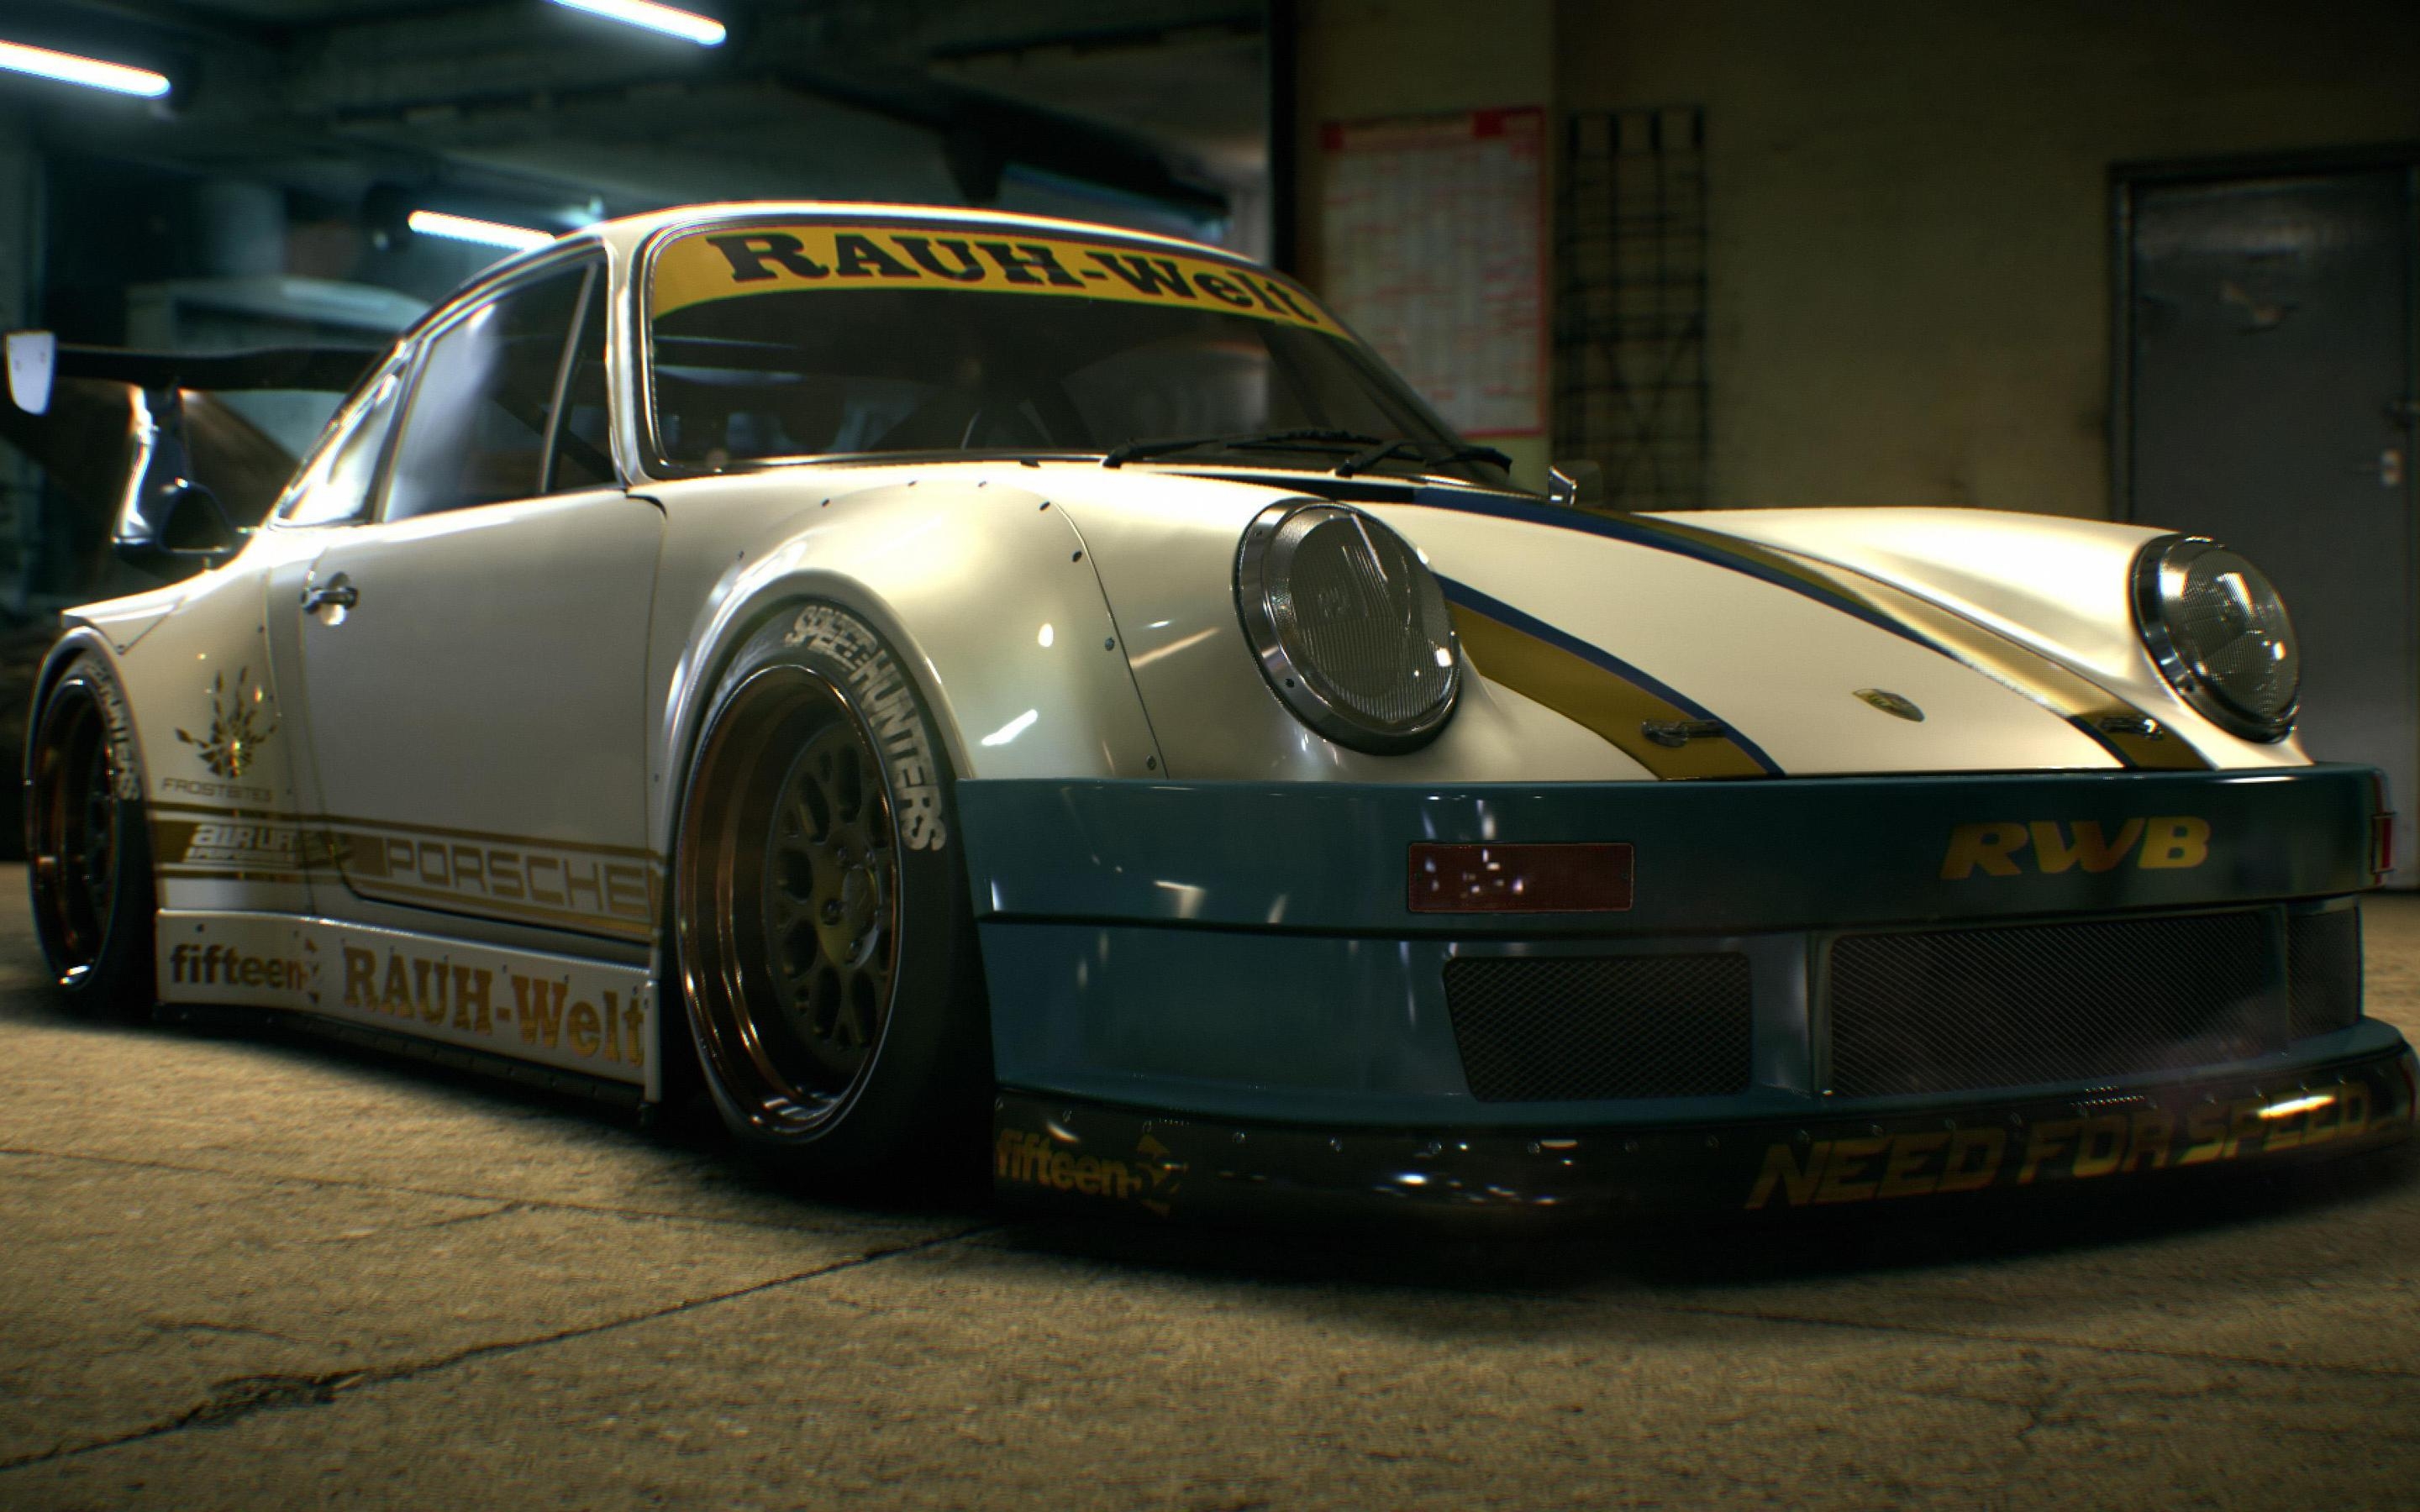 Need For Speed Porsche Rauh-Welt for 2880 x 1800 Retina Display resolution